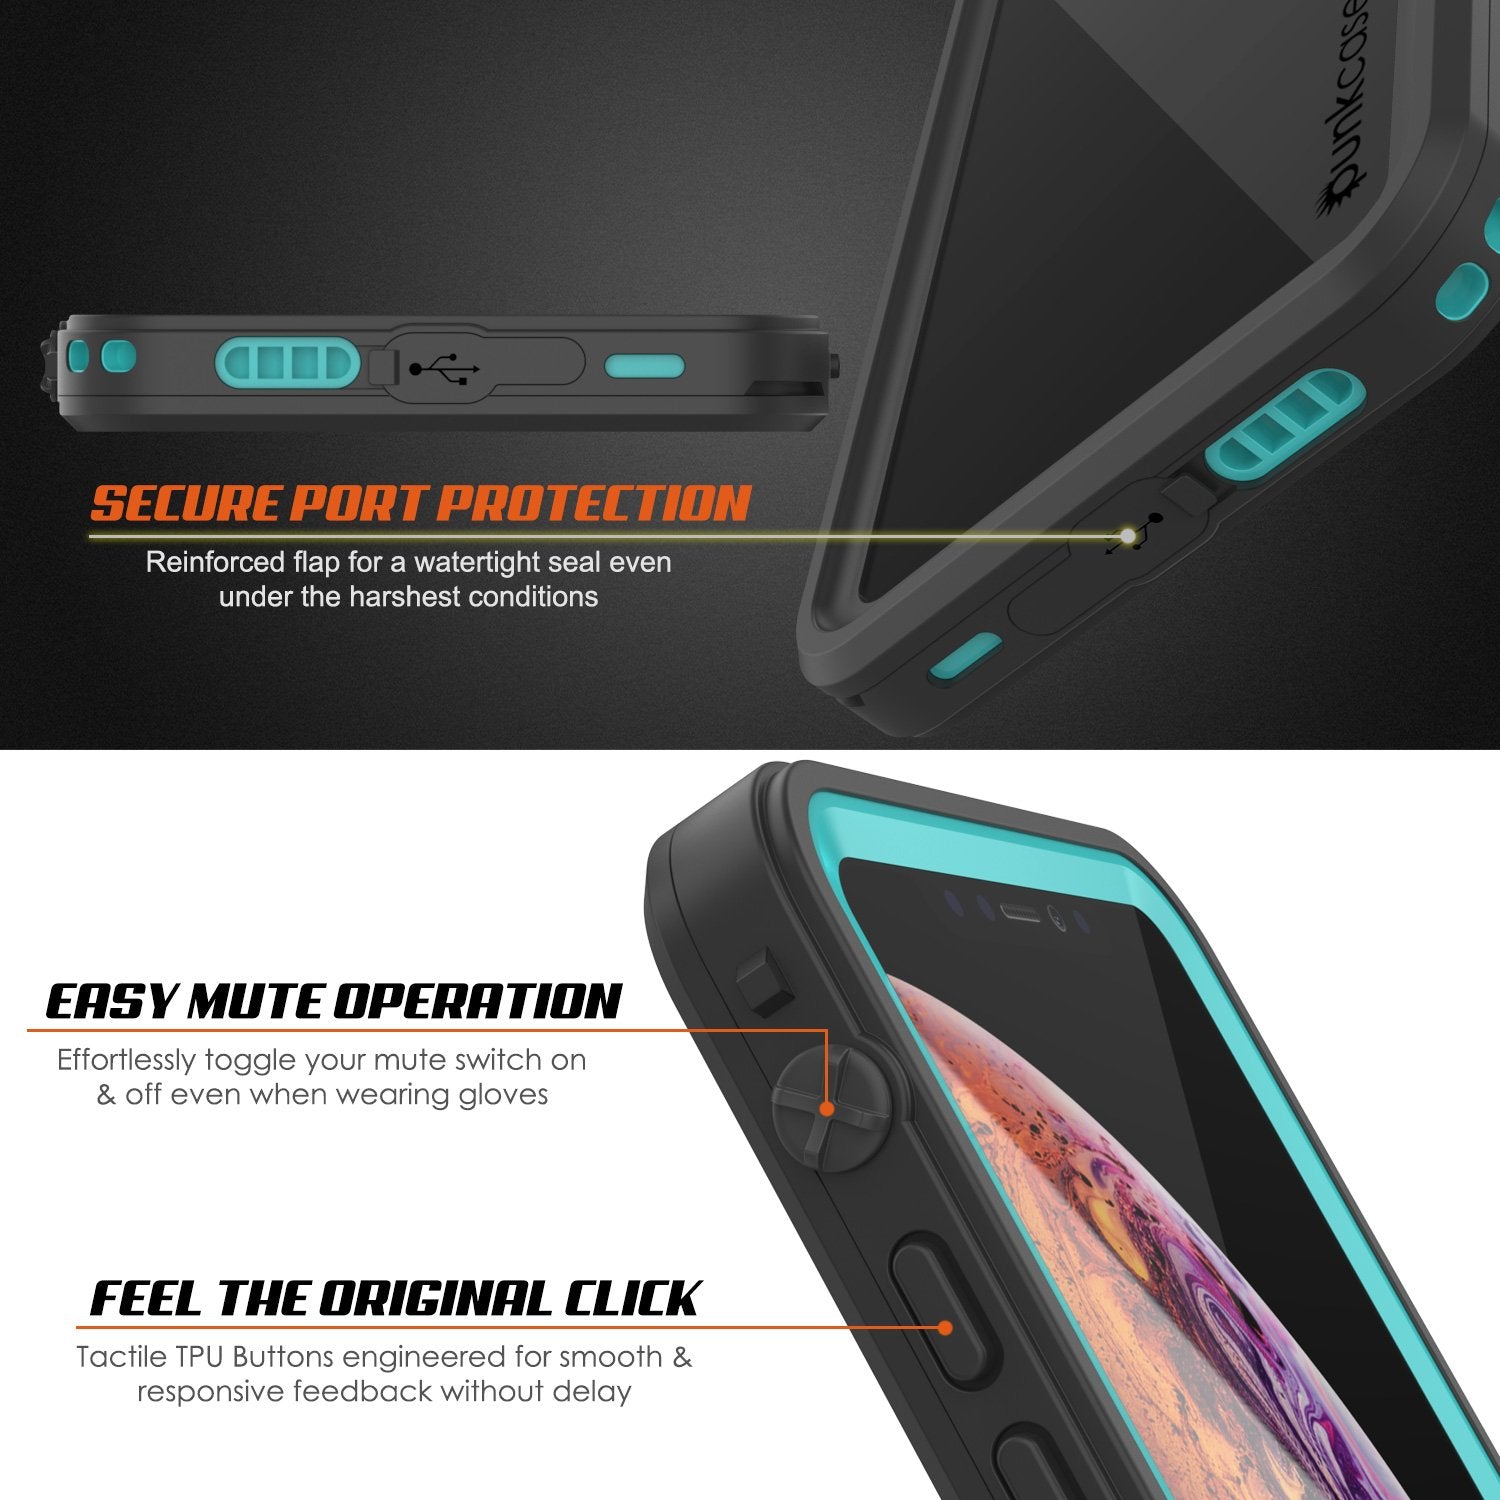 iPhone XR Waterproof Case, Punkcase [Extreme Series] Armor Cover W/ Built In Screen Protector [Teal] - PunkCase NZ